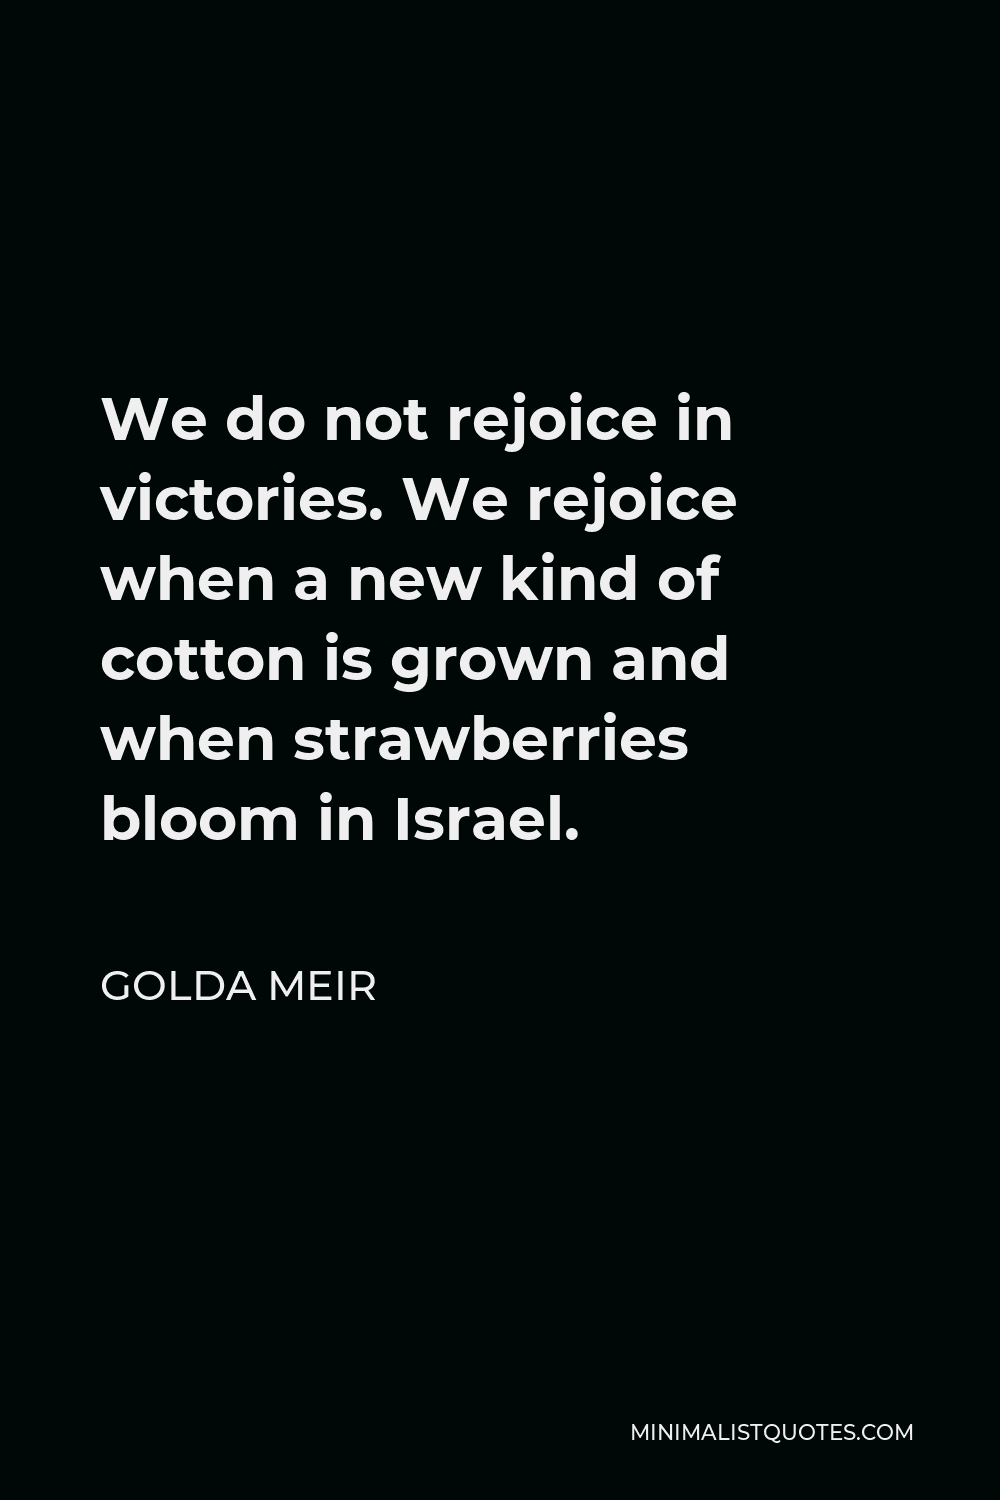 Golda Meir Quote - We do not rejoice in victories. We rejoice when a new kind of cotton is grown and when strawberries bloom in Israel.